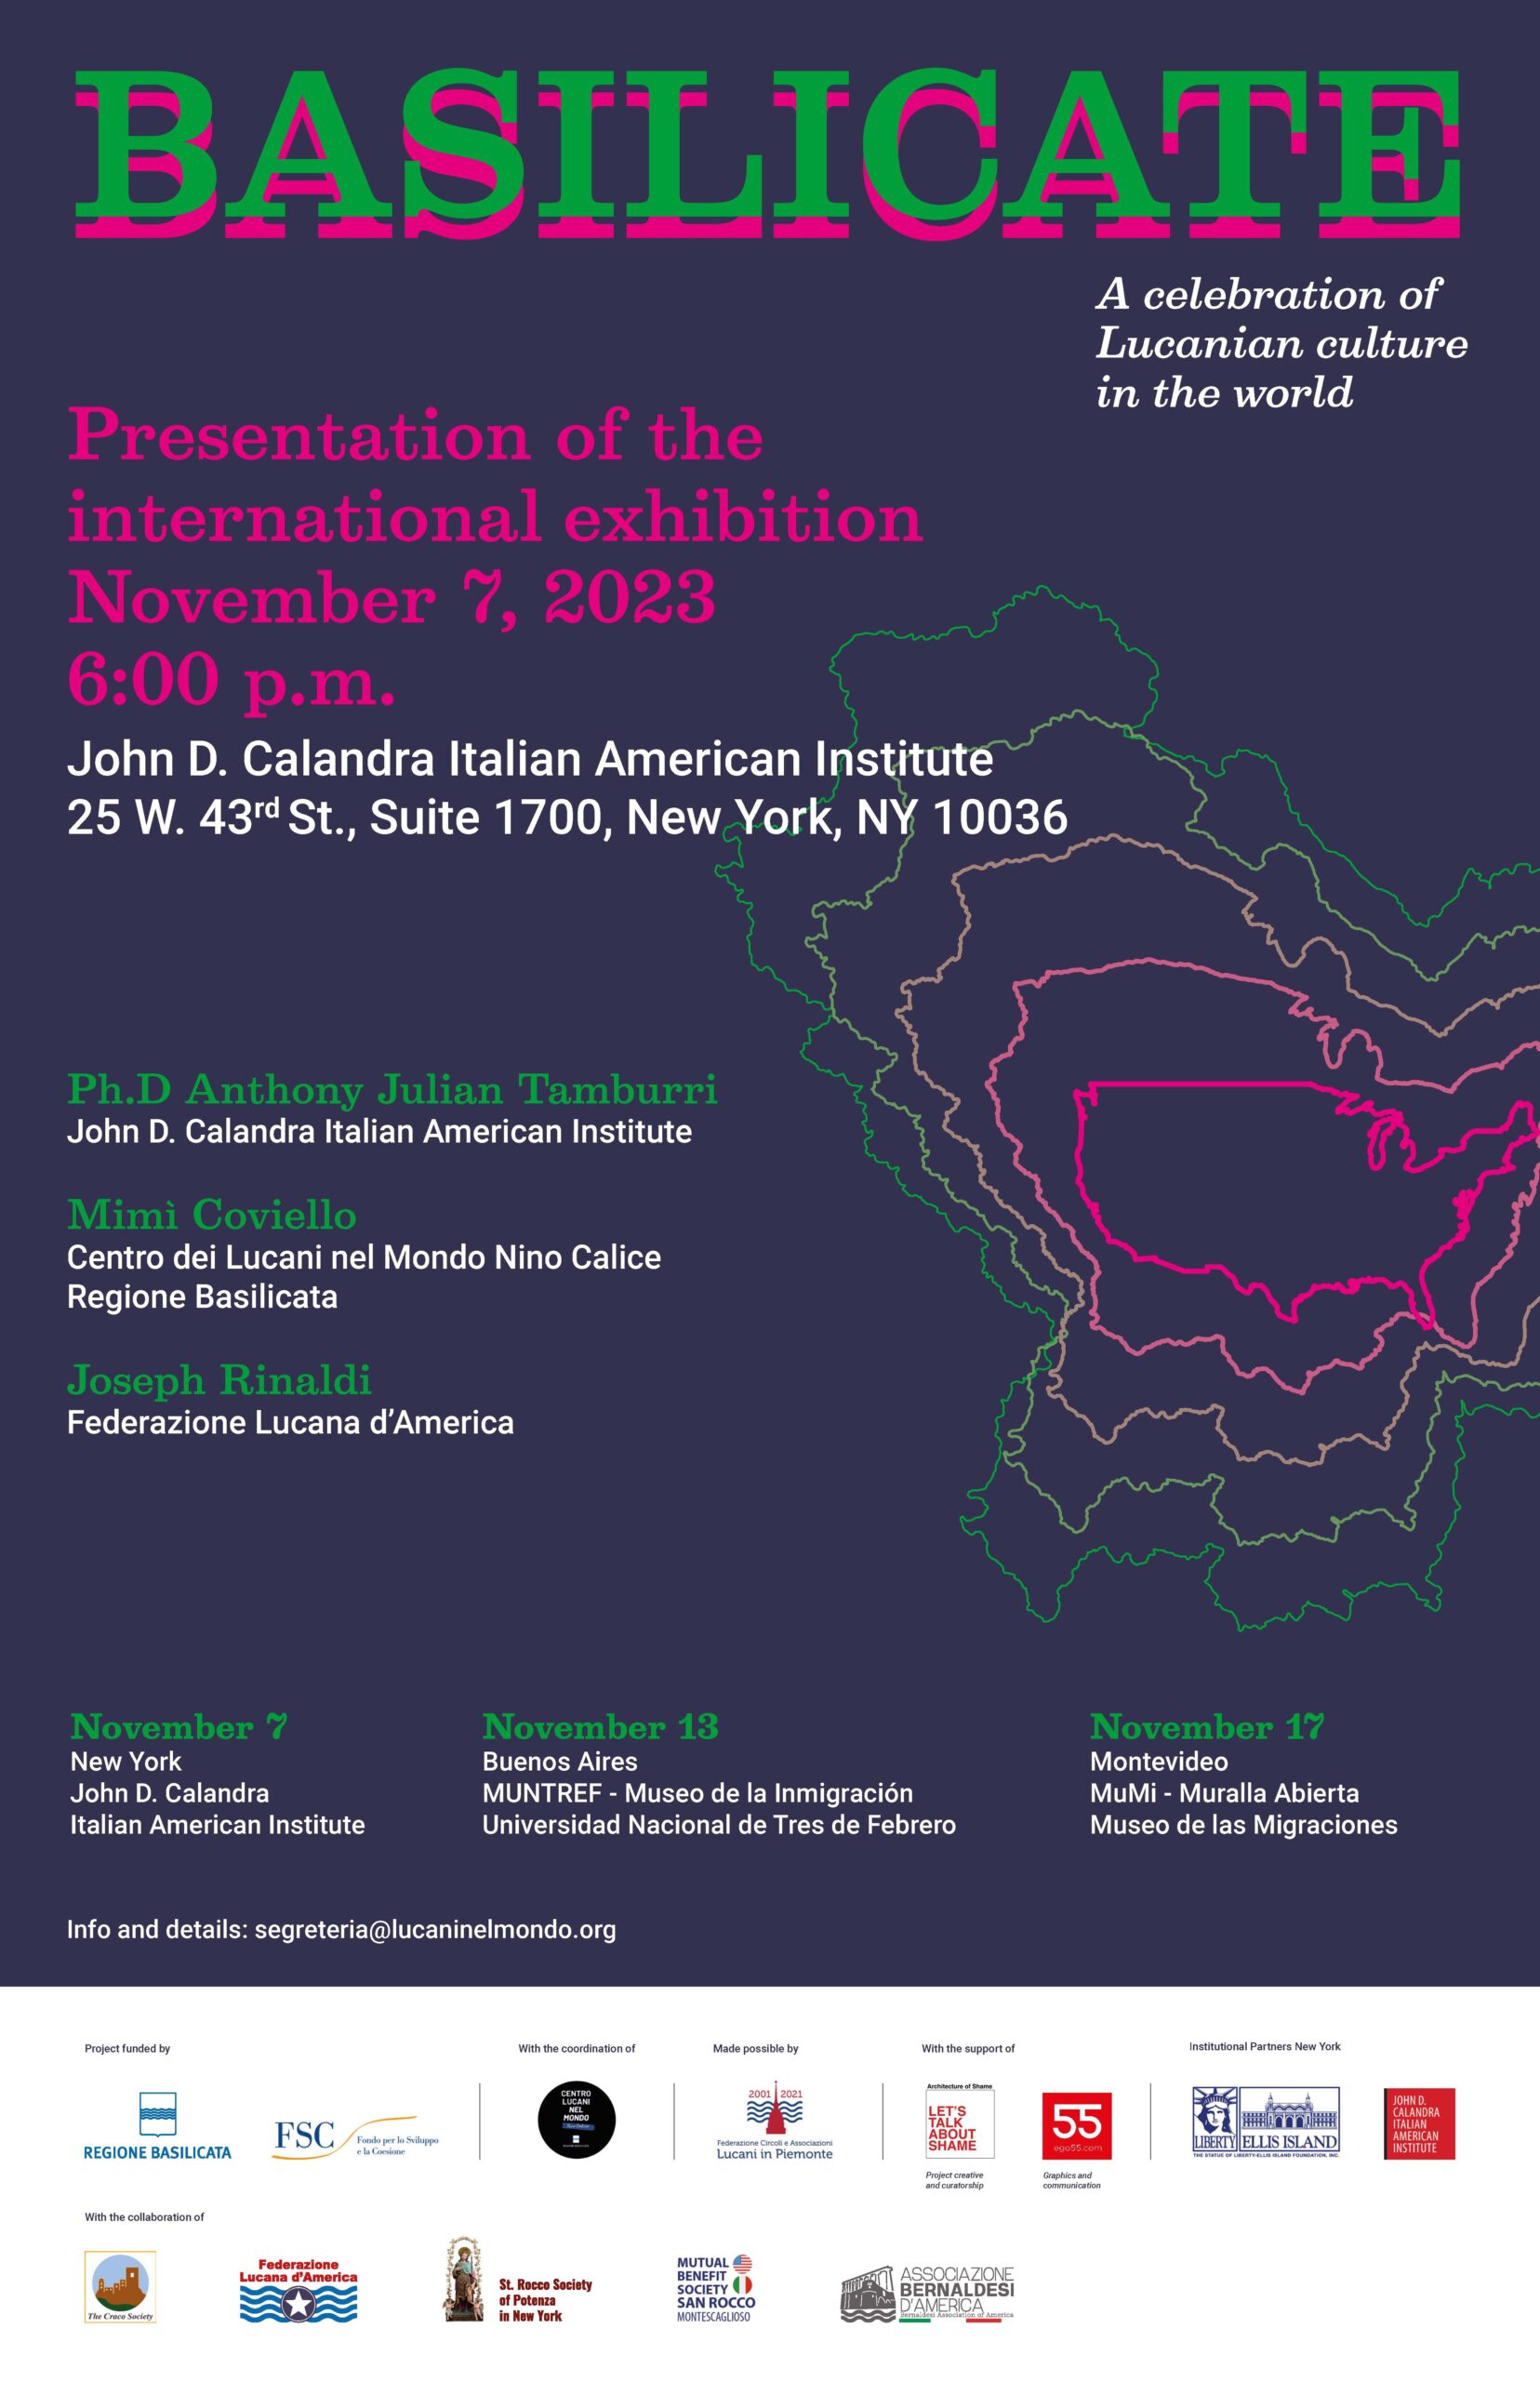 Exhibition Presentation Basilicate: A Celebration of Lucanian Culture in the World